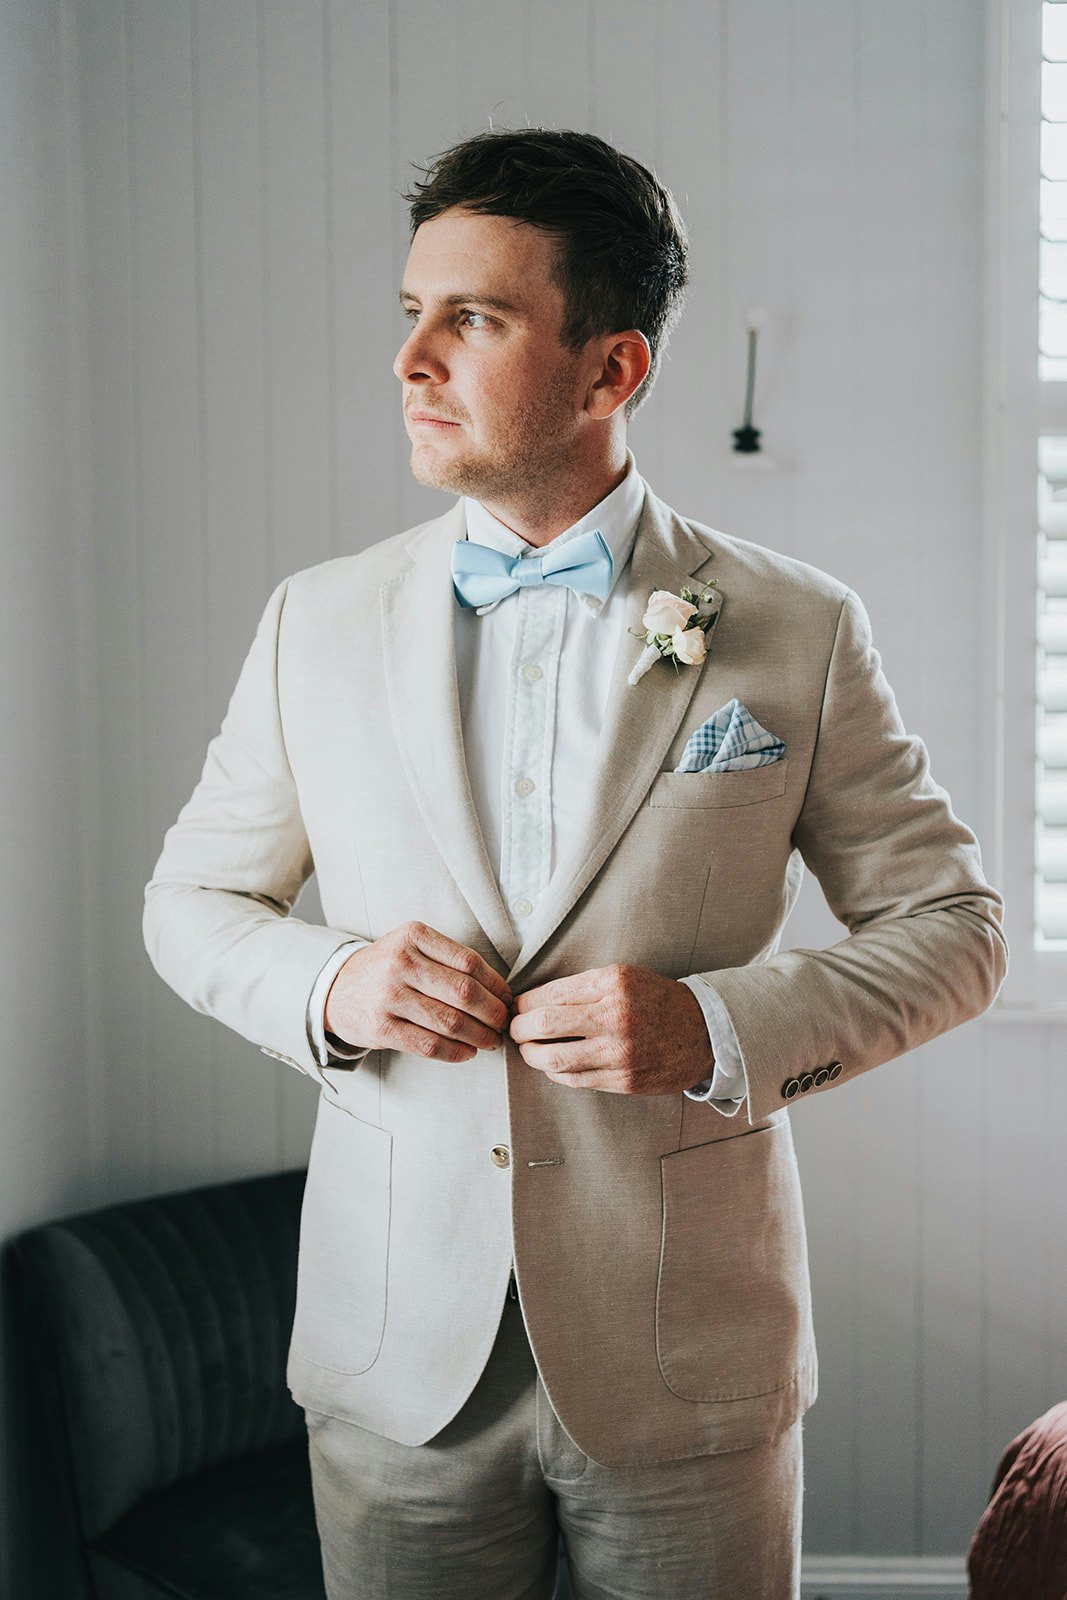 Groom buttoning up jacket